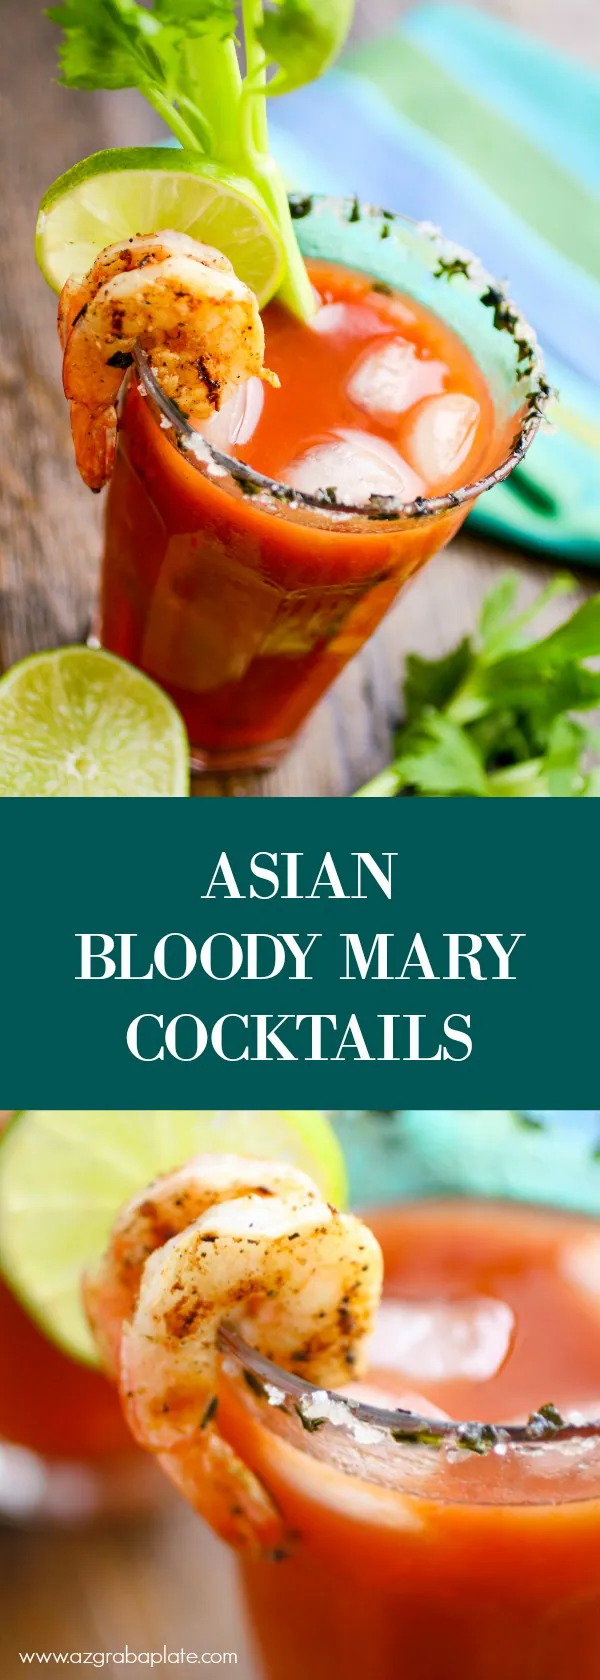 Asian Bloody Mary Cocktails are a fun cocktail to whip up for brunch. Your guests will love them!